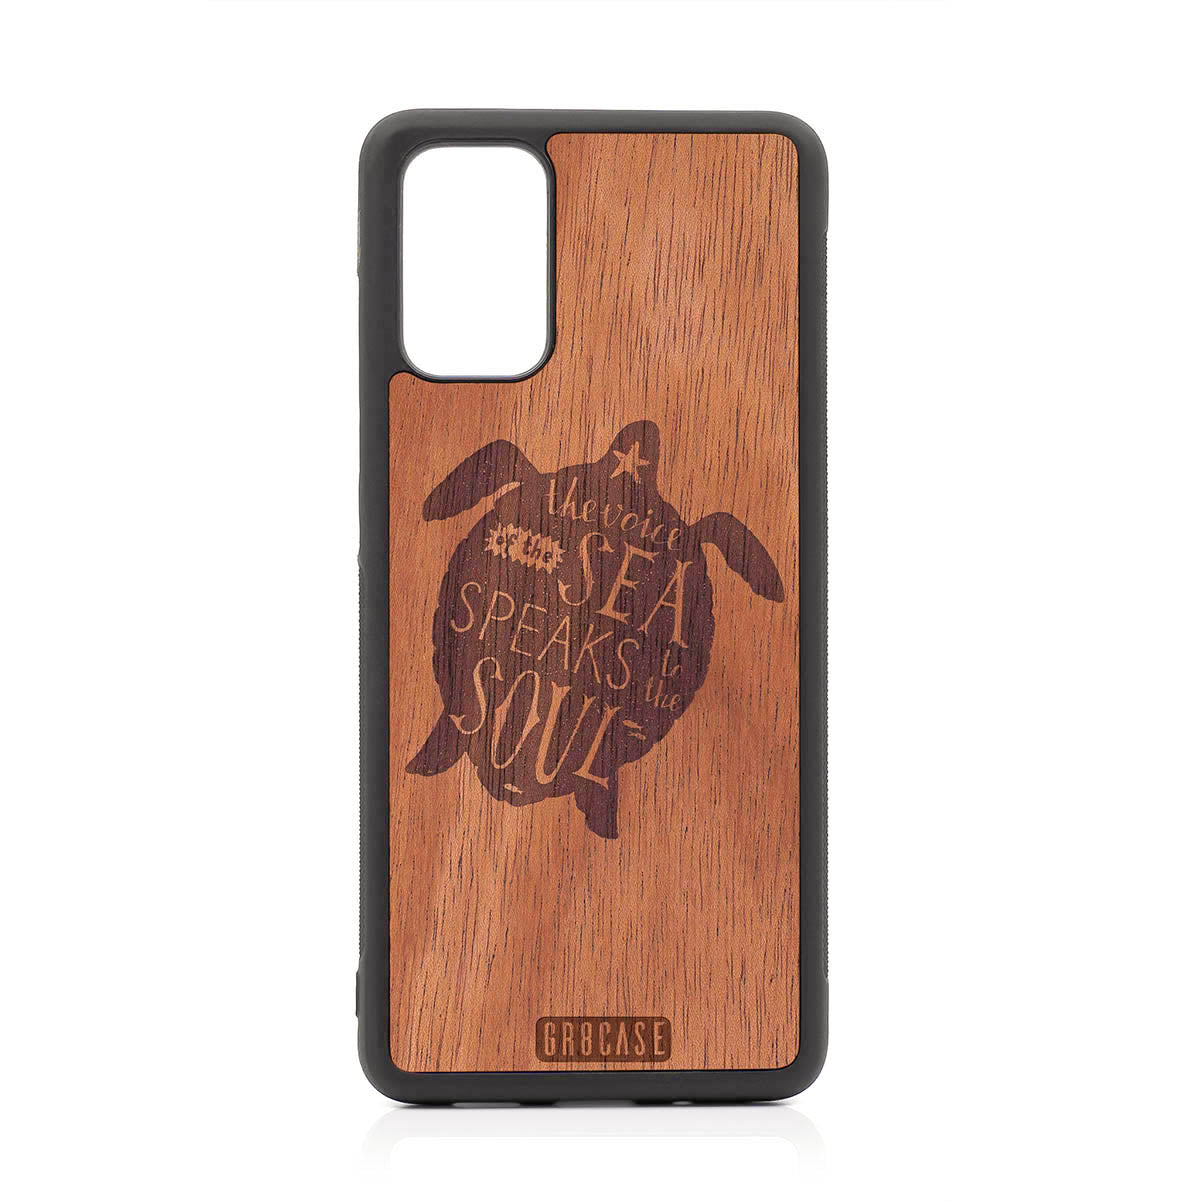 The Voice Of The Sea Speaks To The Soul (Turtle) Design Wood Case For Samsung Galaxy S20 Plus